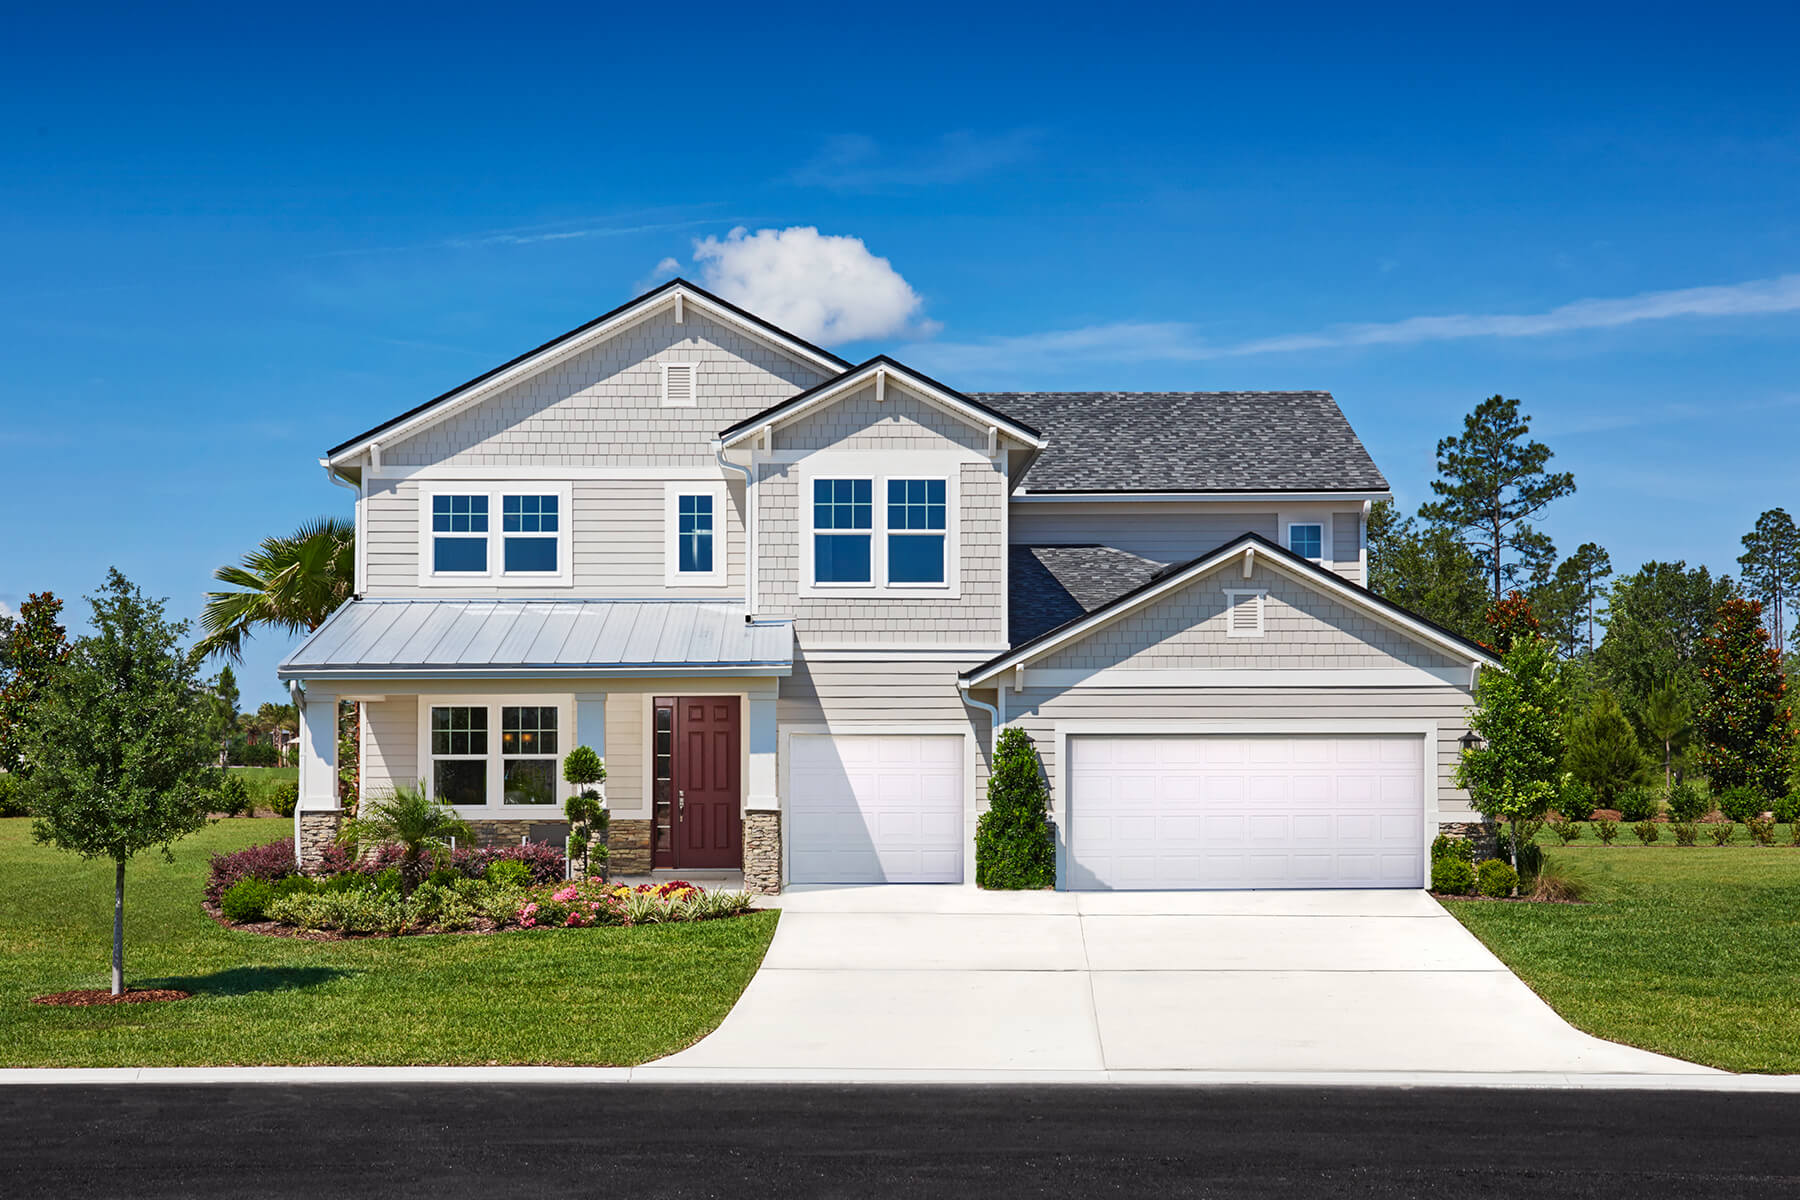 New Homes for Sale in Boise, Idaho - Hubble Homes